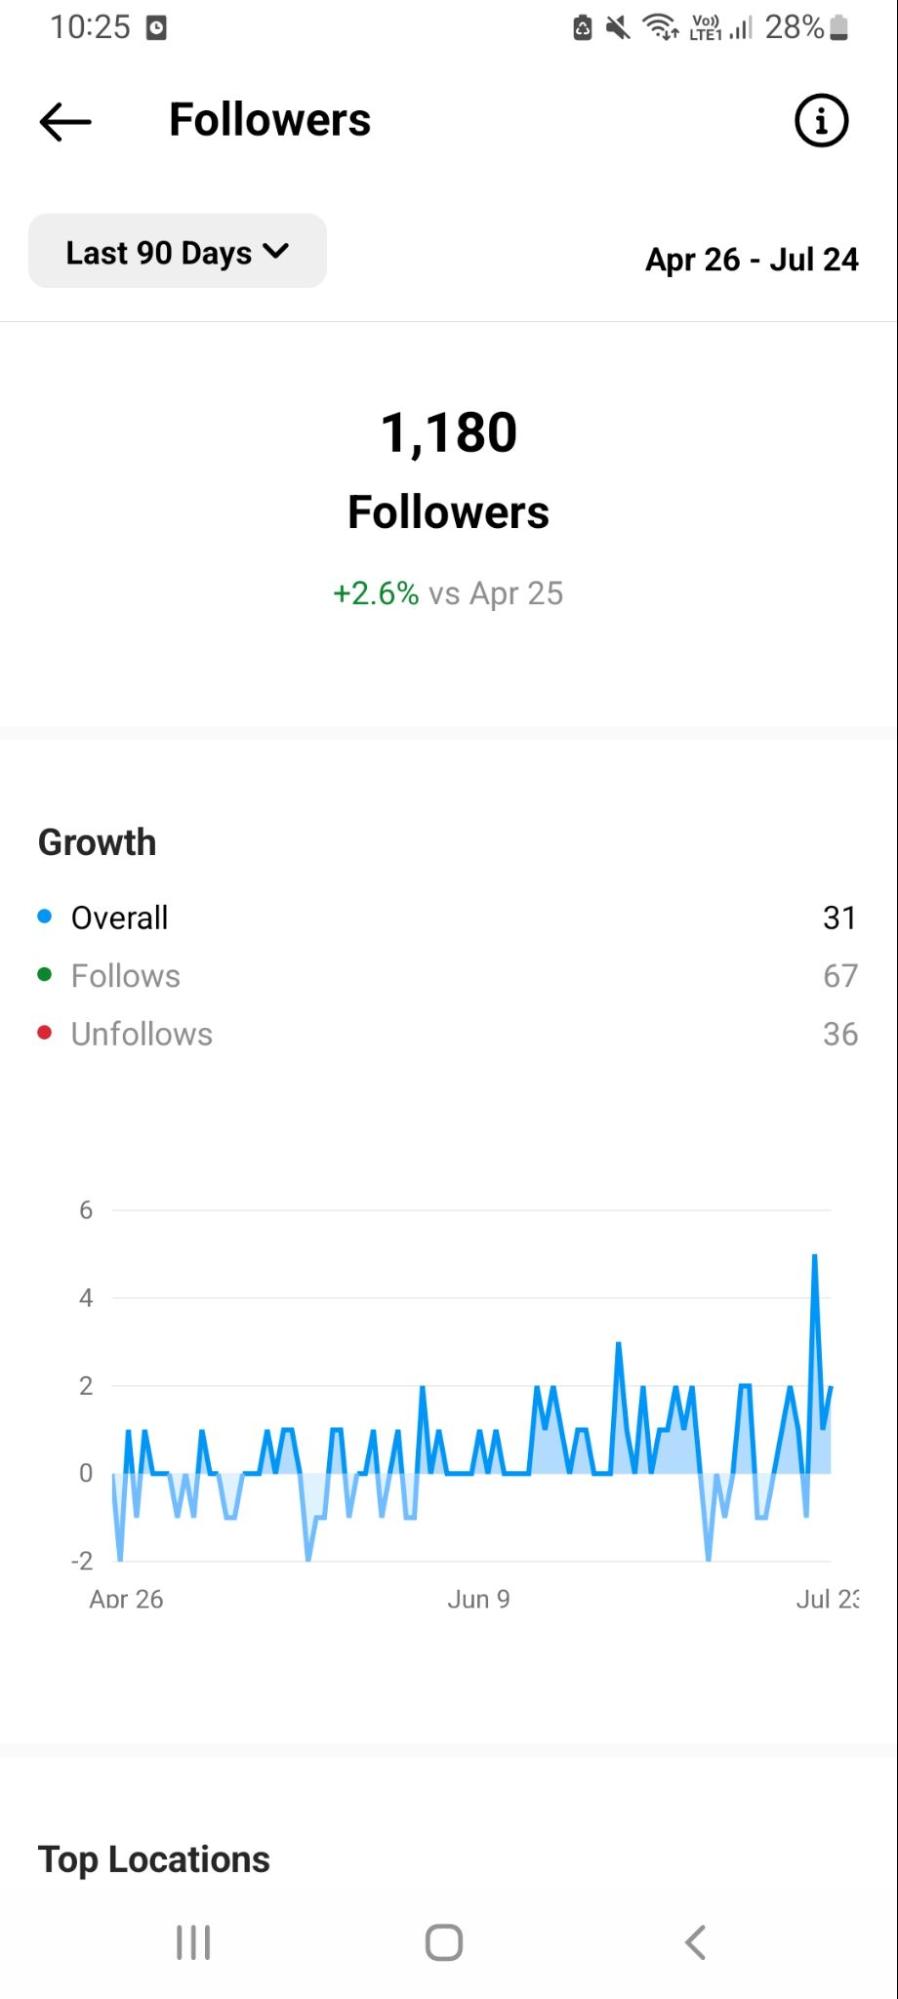 How to Use Instagram Followers Count History for Growth?